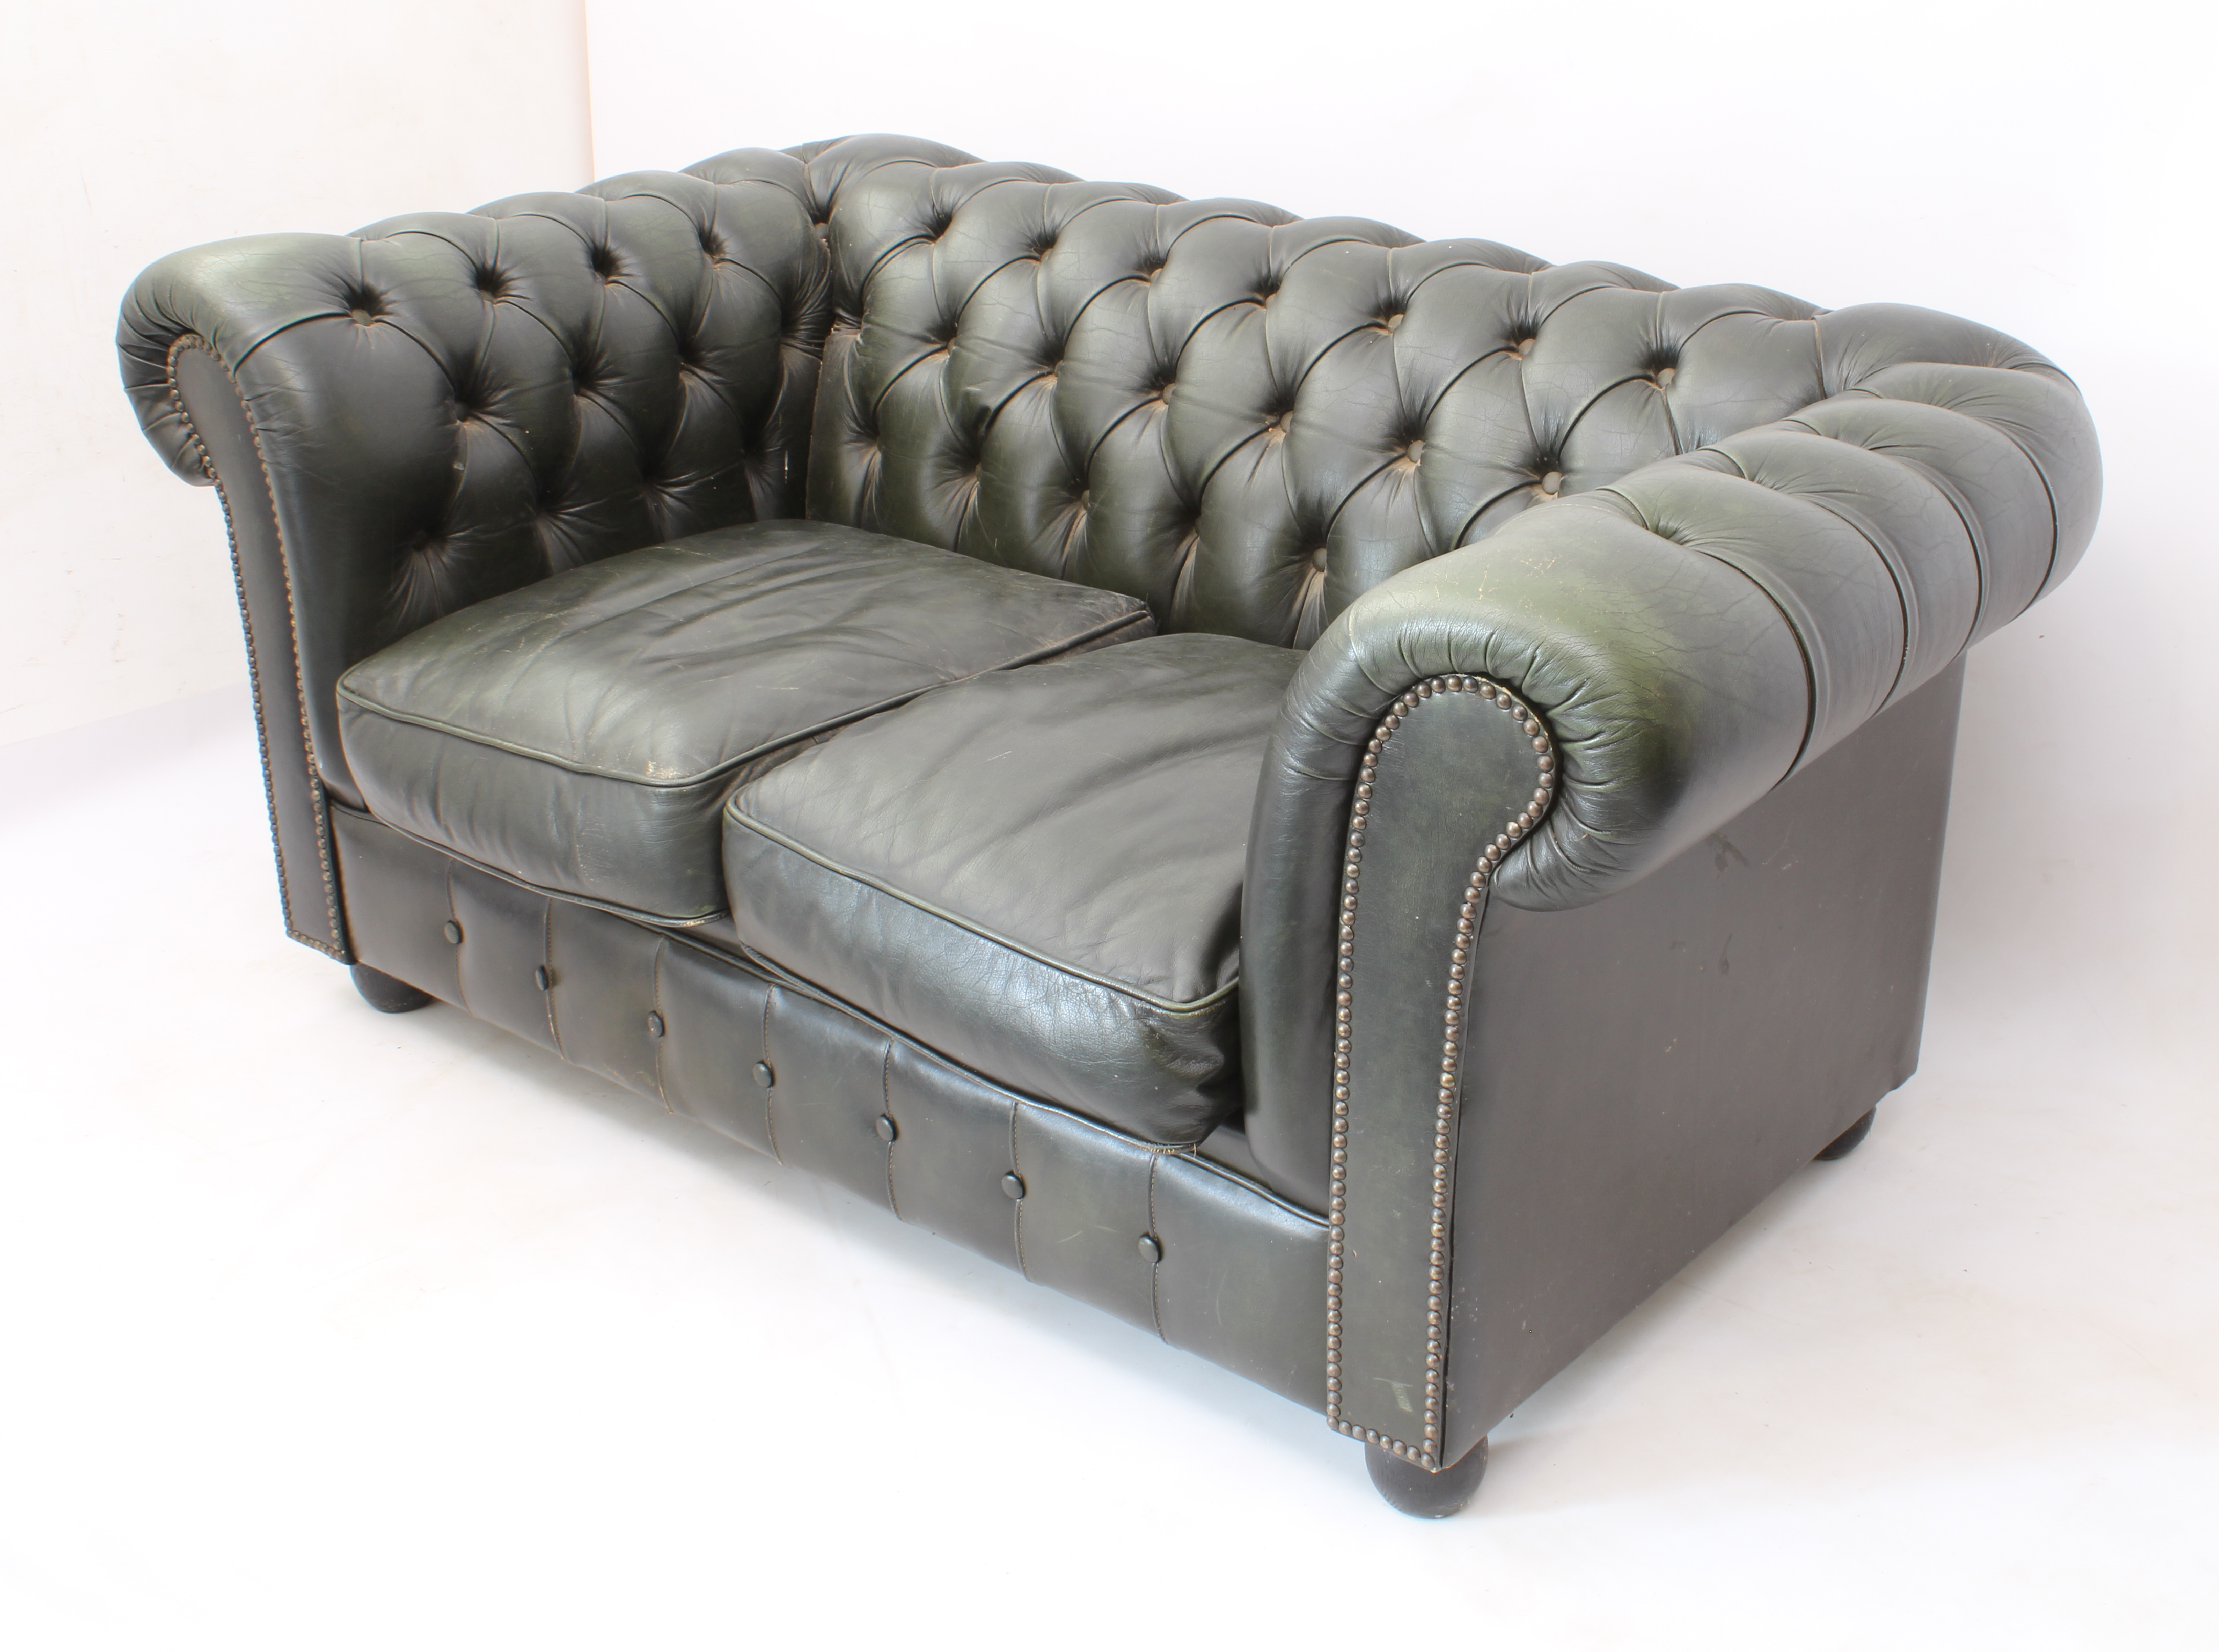 A green leather two-seater Chesterfield sofa - raised on four bun feet (LWH 148 x 87 x 71 cm) - Image 2 of 3